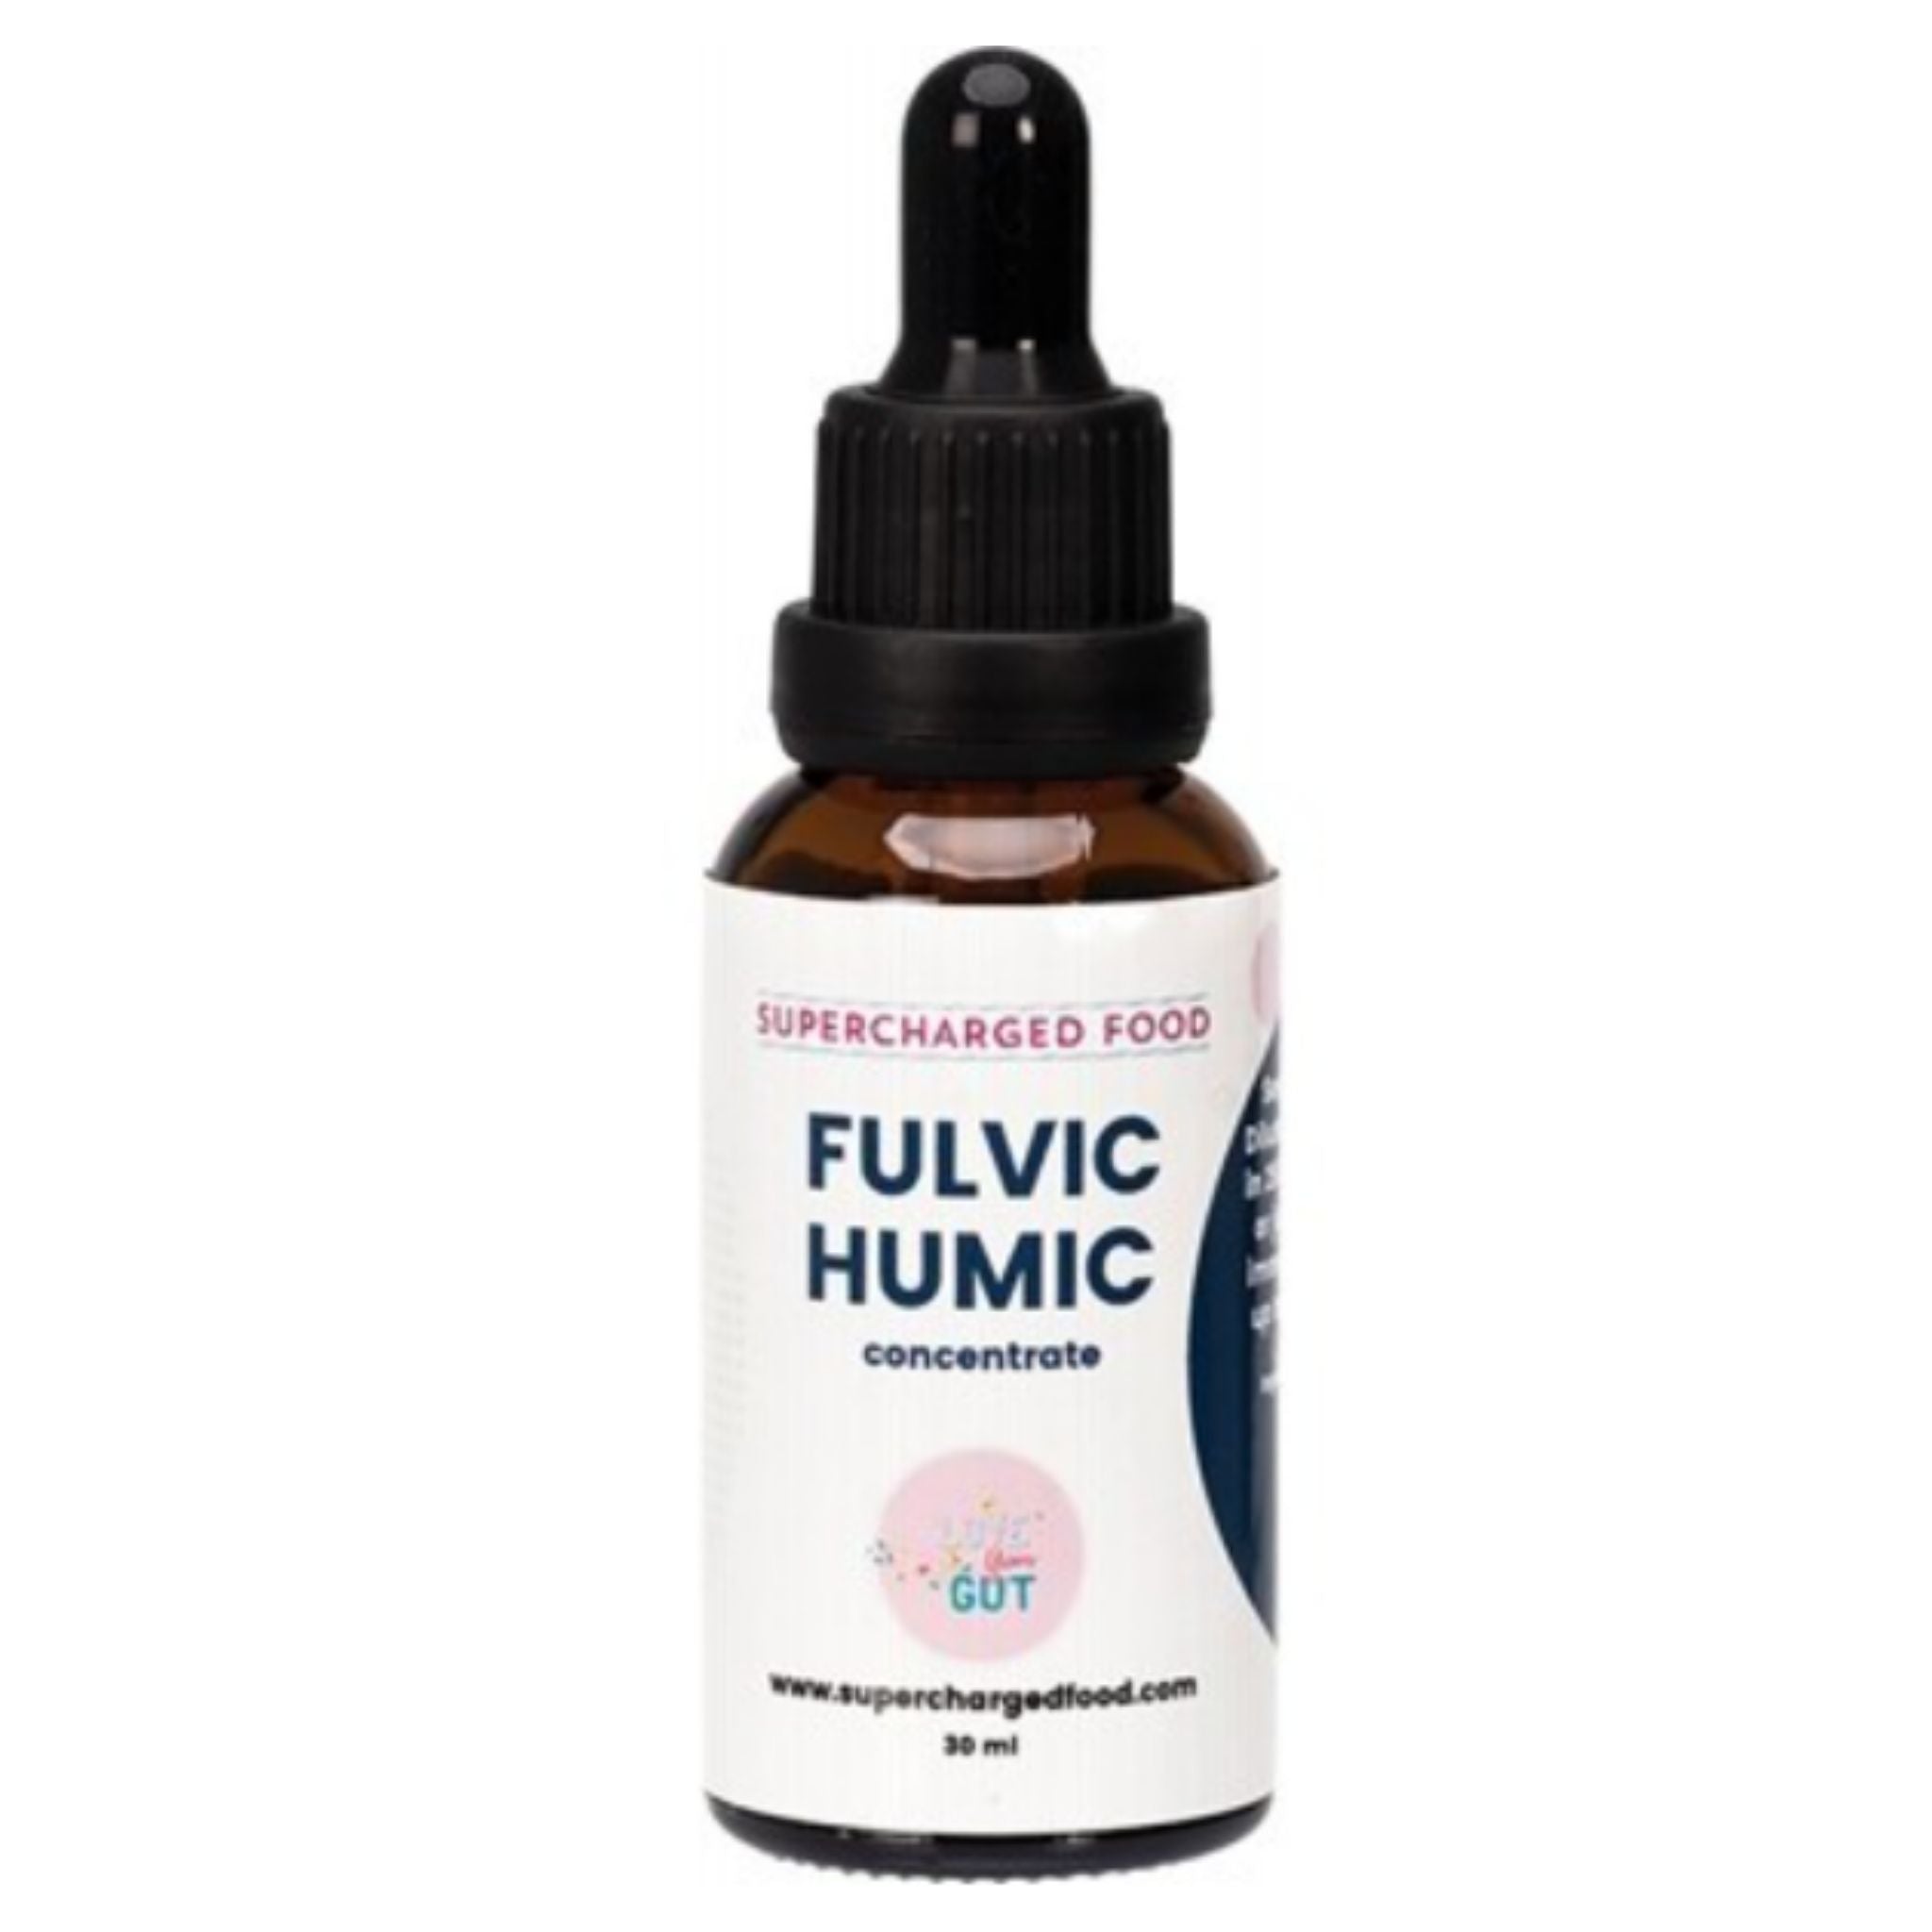 Fulvic Humic Concentrate Drops - Supercharged Food. 30ml